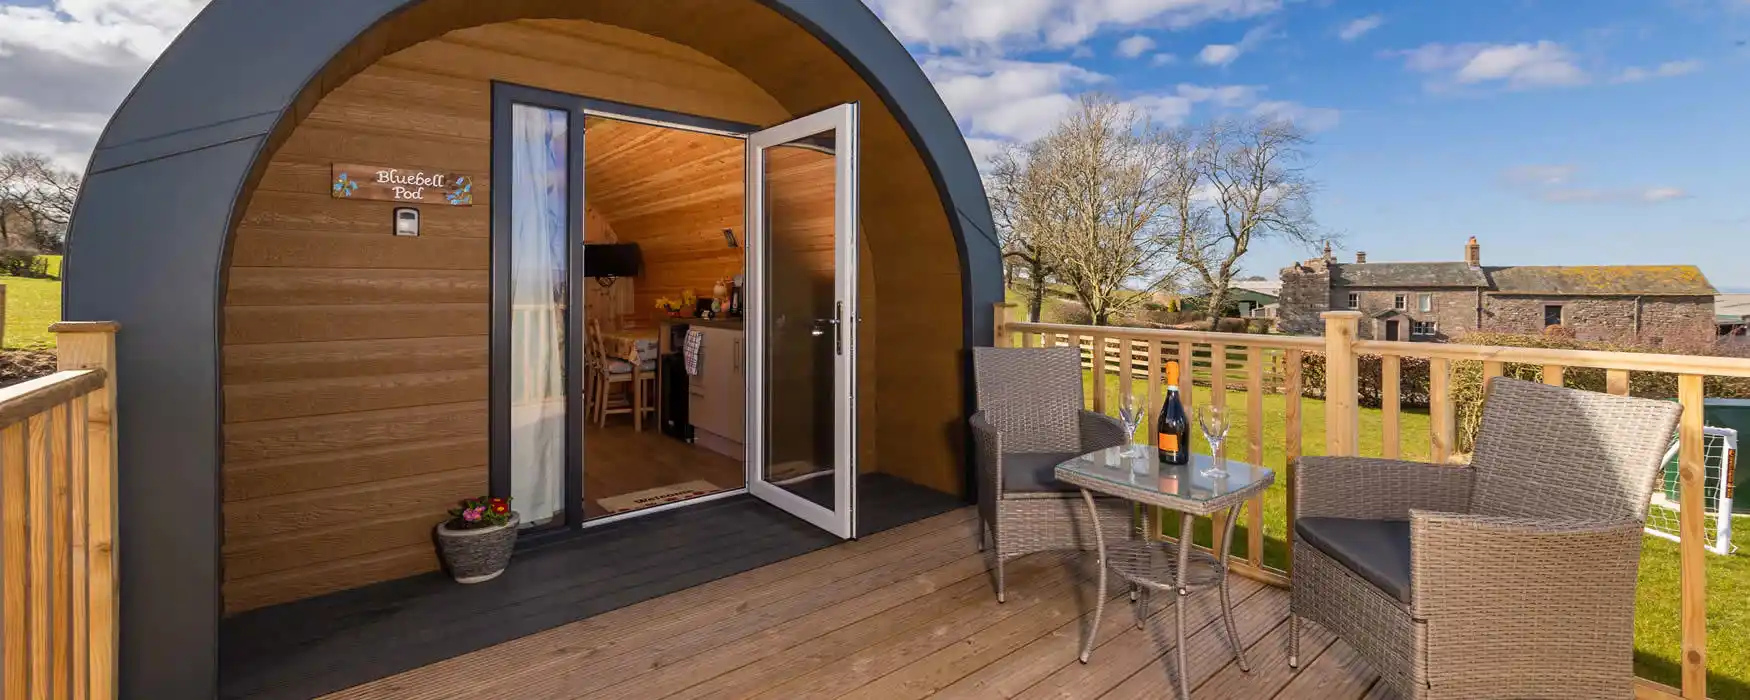 Penrith camping and glamping pods